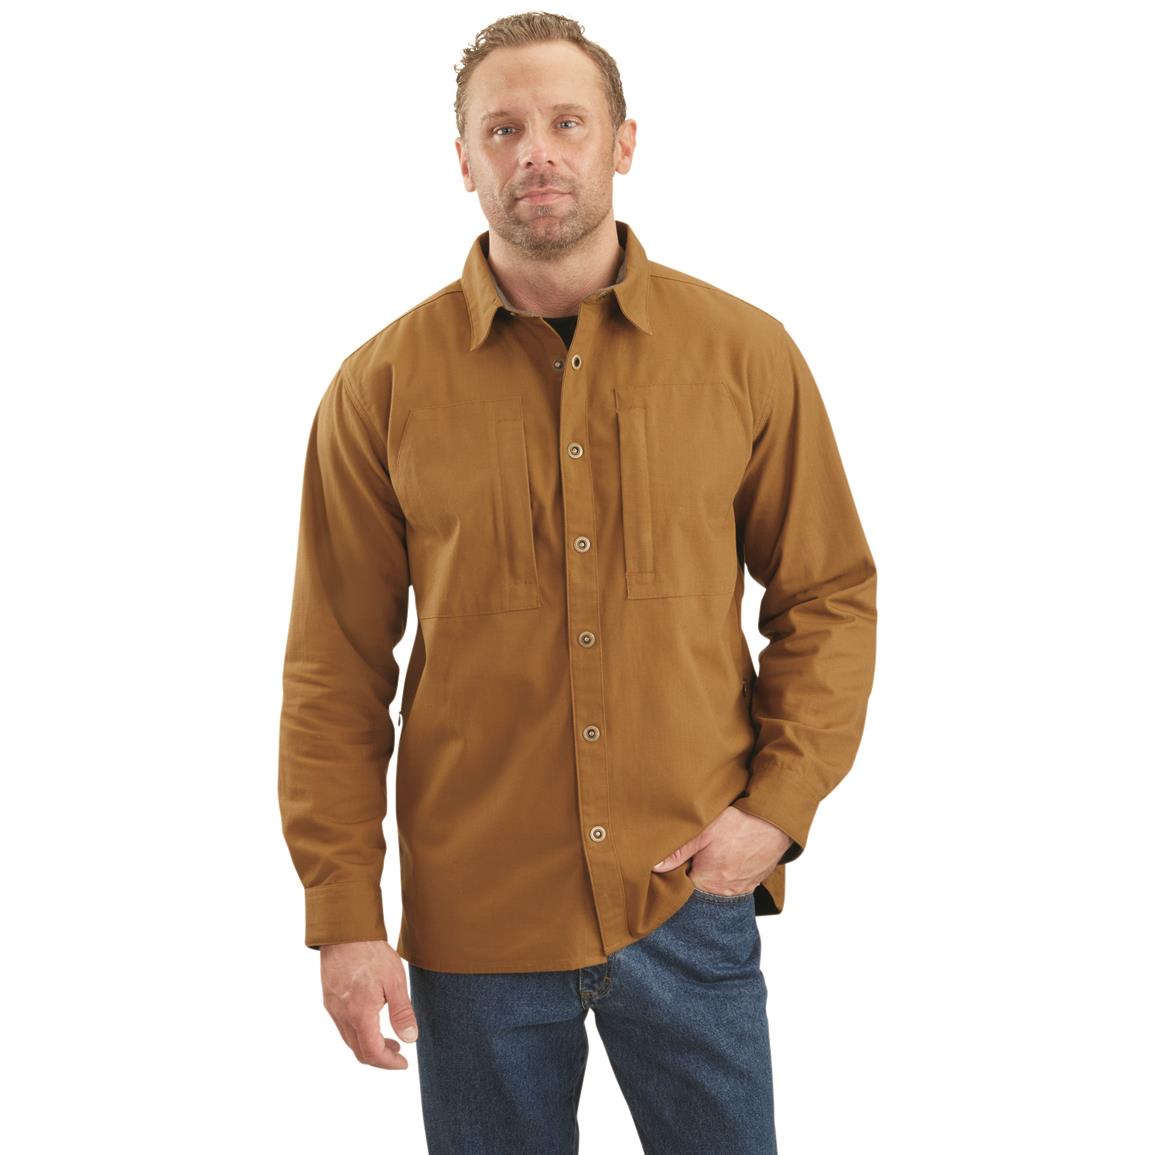 HQ ISSUE Ripstop Utility Overshirt, Bronze